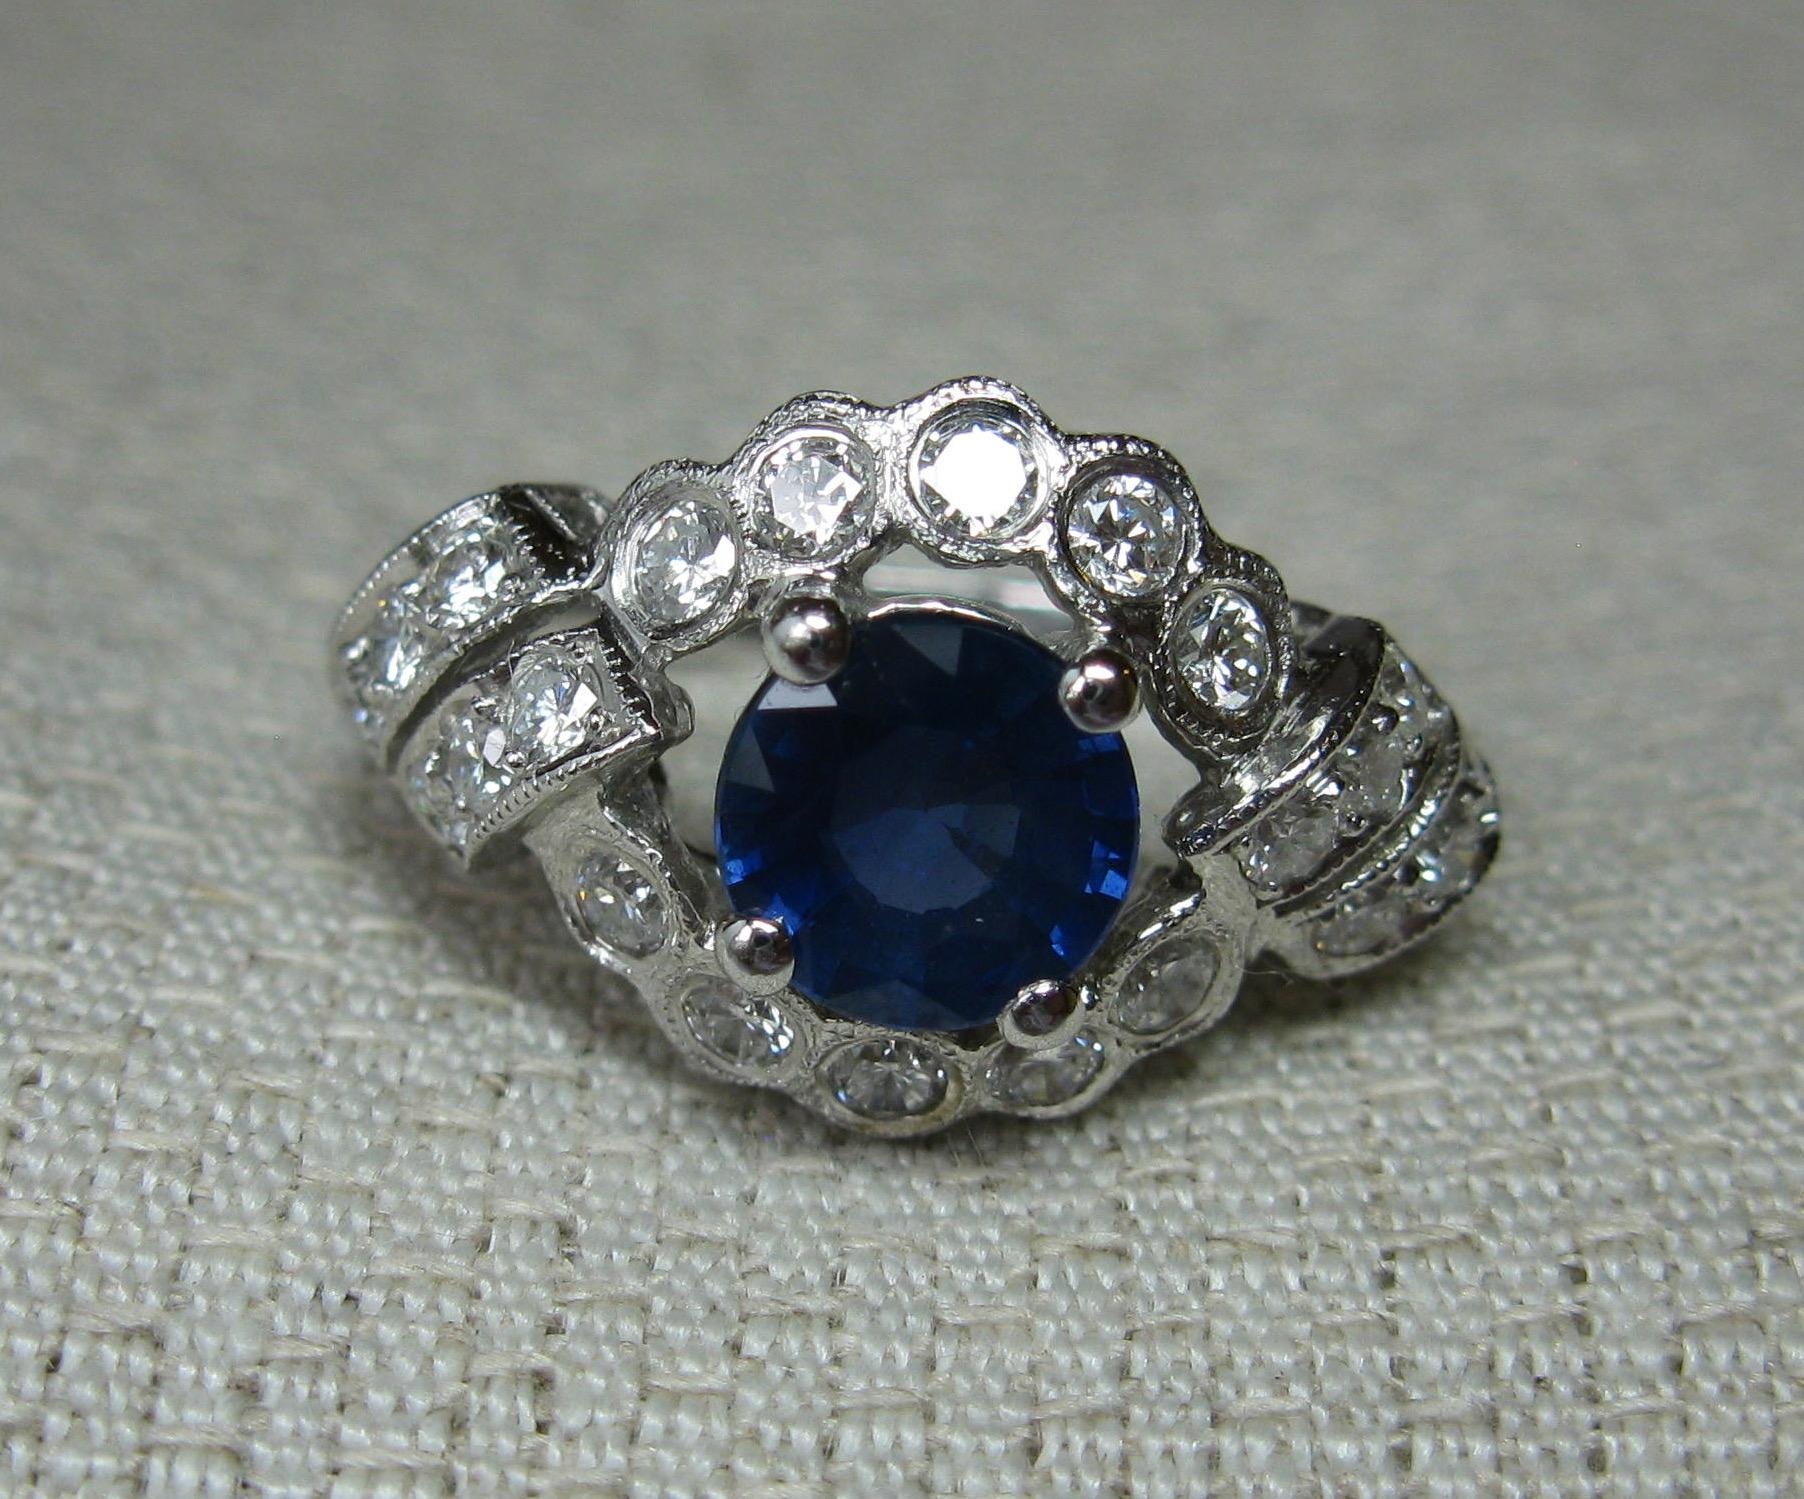 This is a stunning 1.14 Carat Sapphire Diamond Platinum Wedding Engagement Ring.  The central sapphire is a stunning fine blue color.  The sapphire is accented with 22 Round Brilliant Cut Diamonds of F/G color - very white.  The diamonds total .54